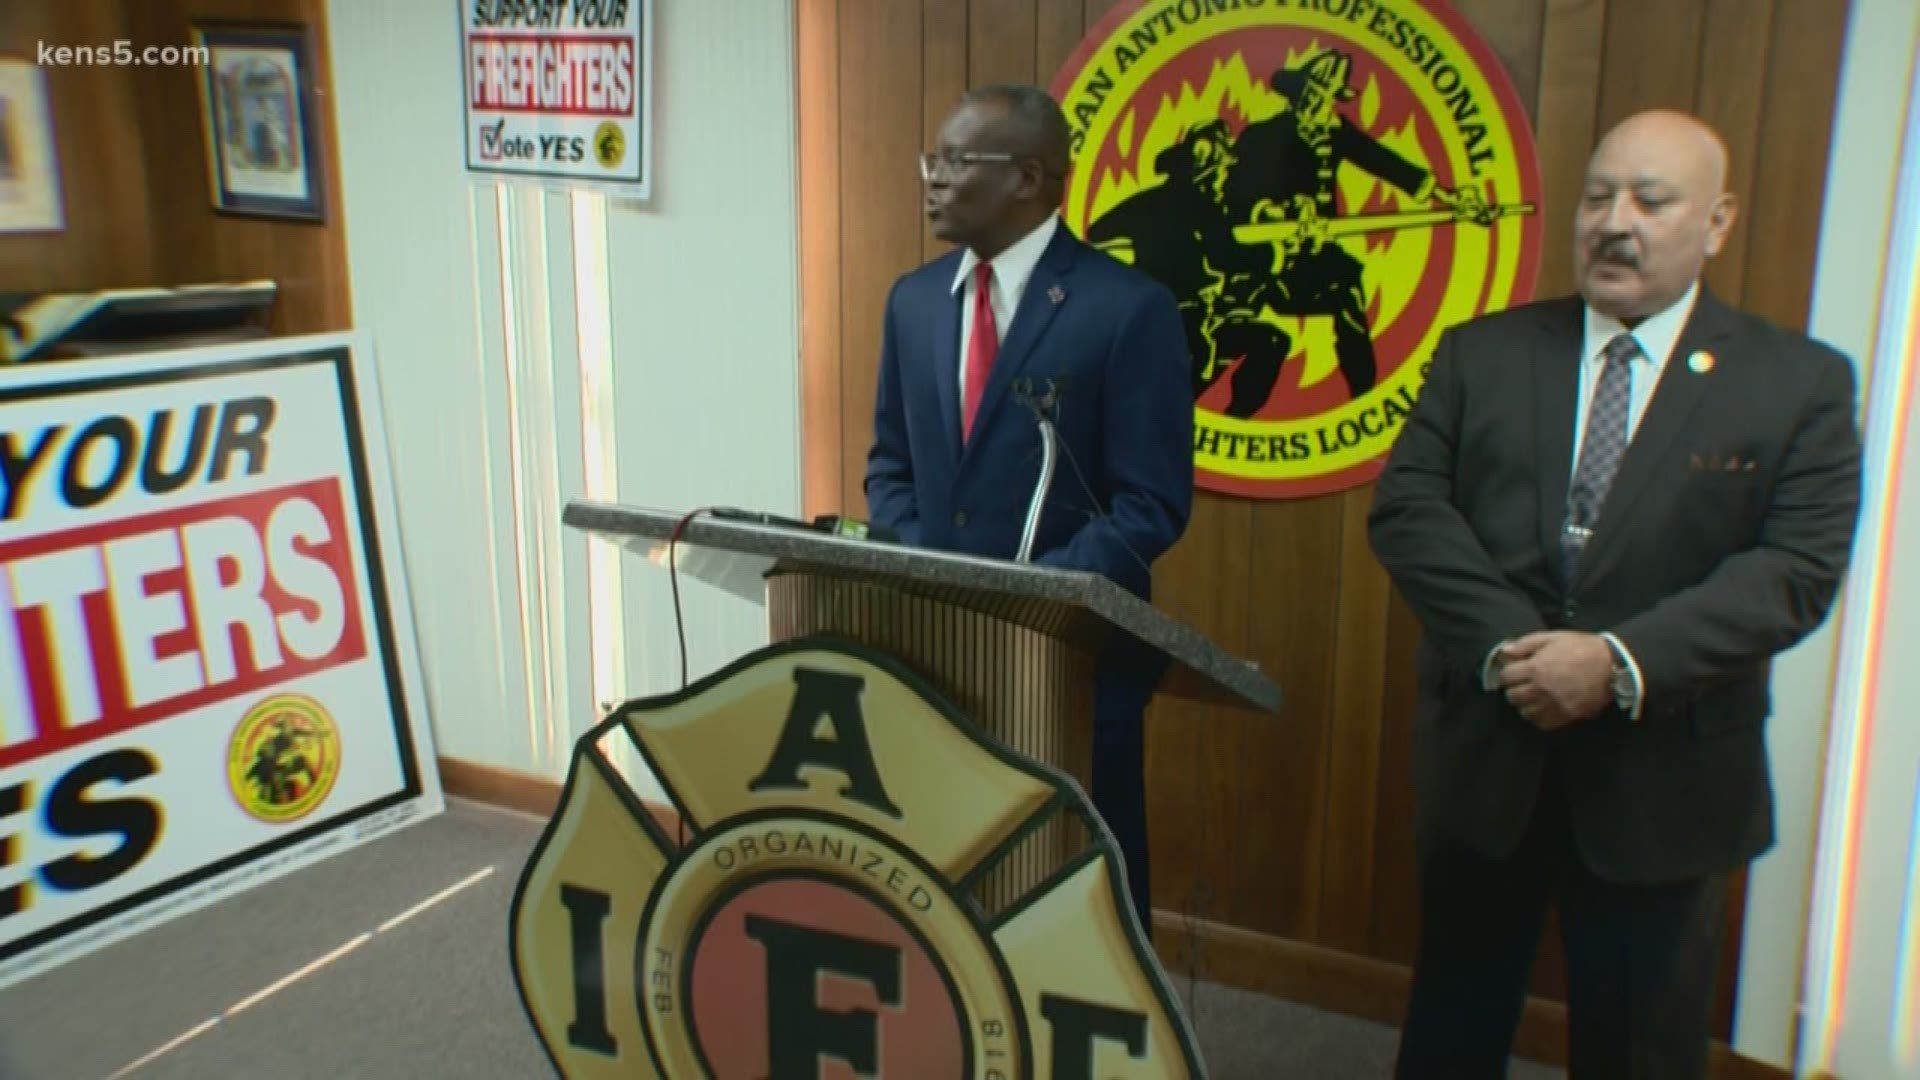 The San Antonio Professional Firefighters Association announced Thursday they've finalized the Collective Bargaining Agreement with the city.